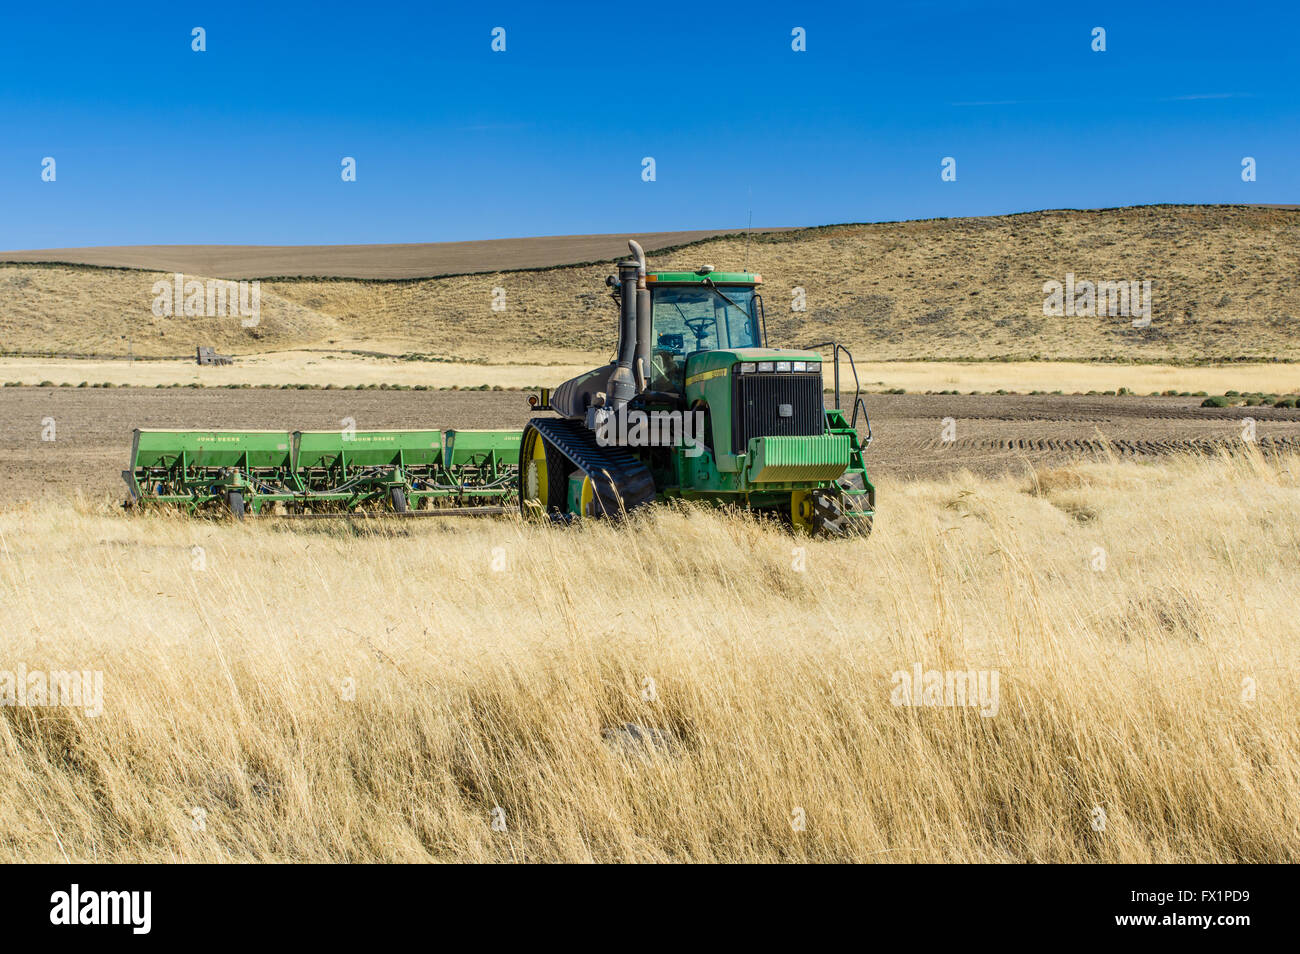 John Deere tractor with planter in a field in eastern Washington Stock Photo